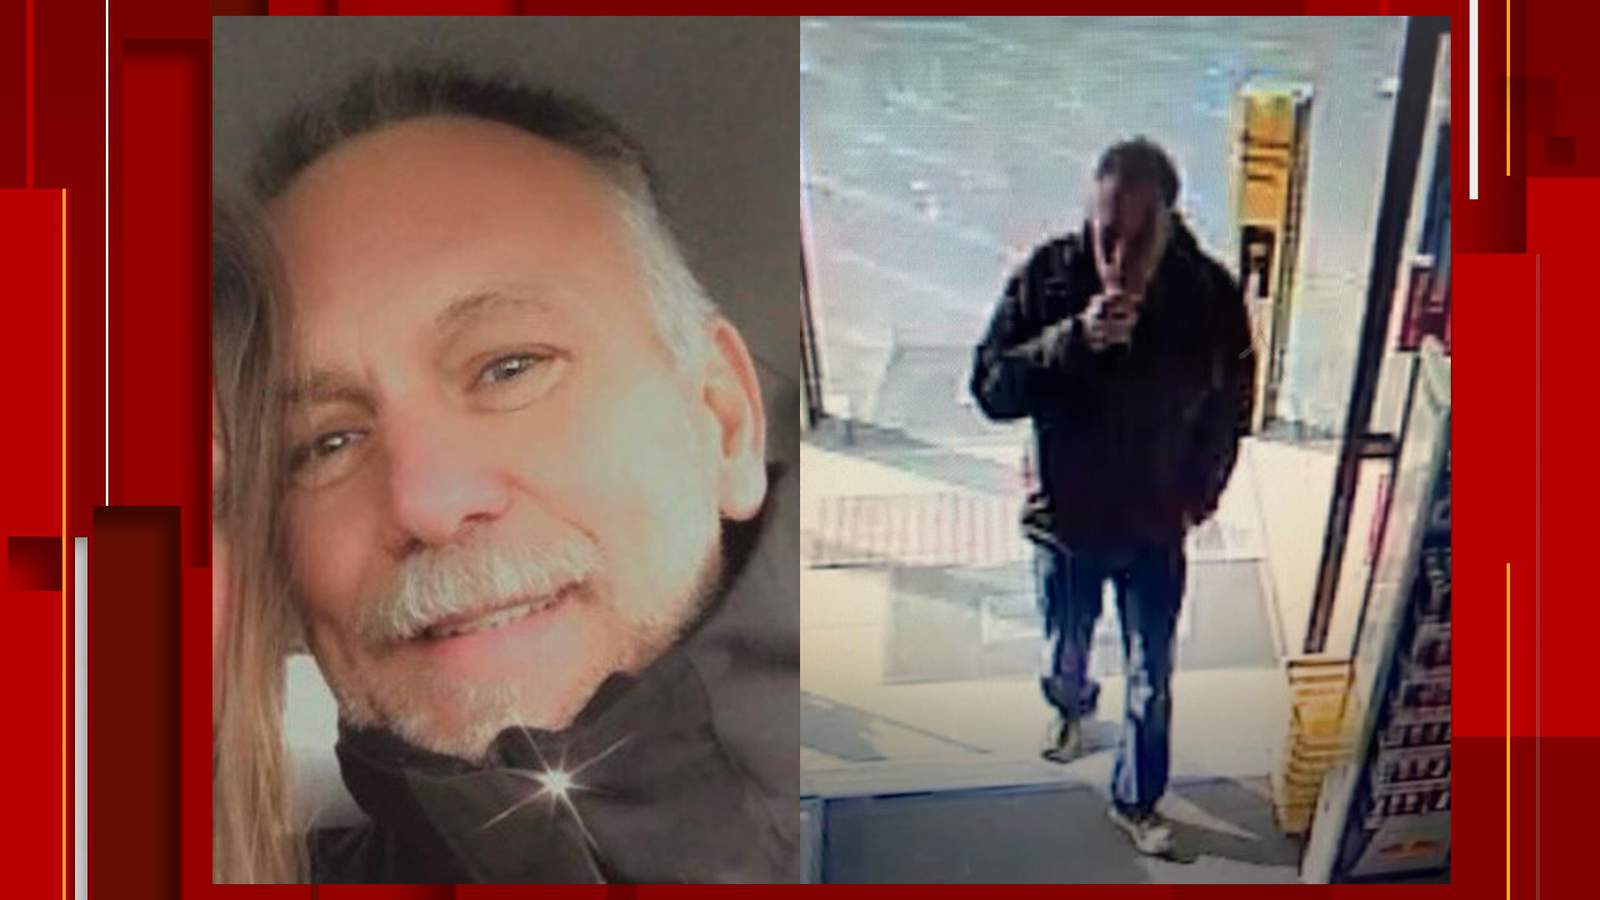 60-year-old man reported missing in Campbell County found safe